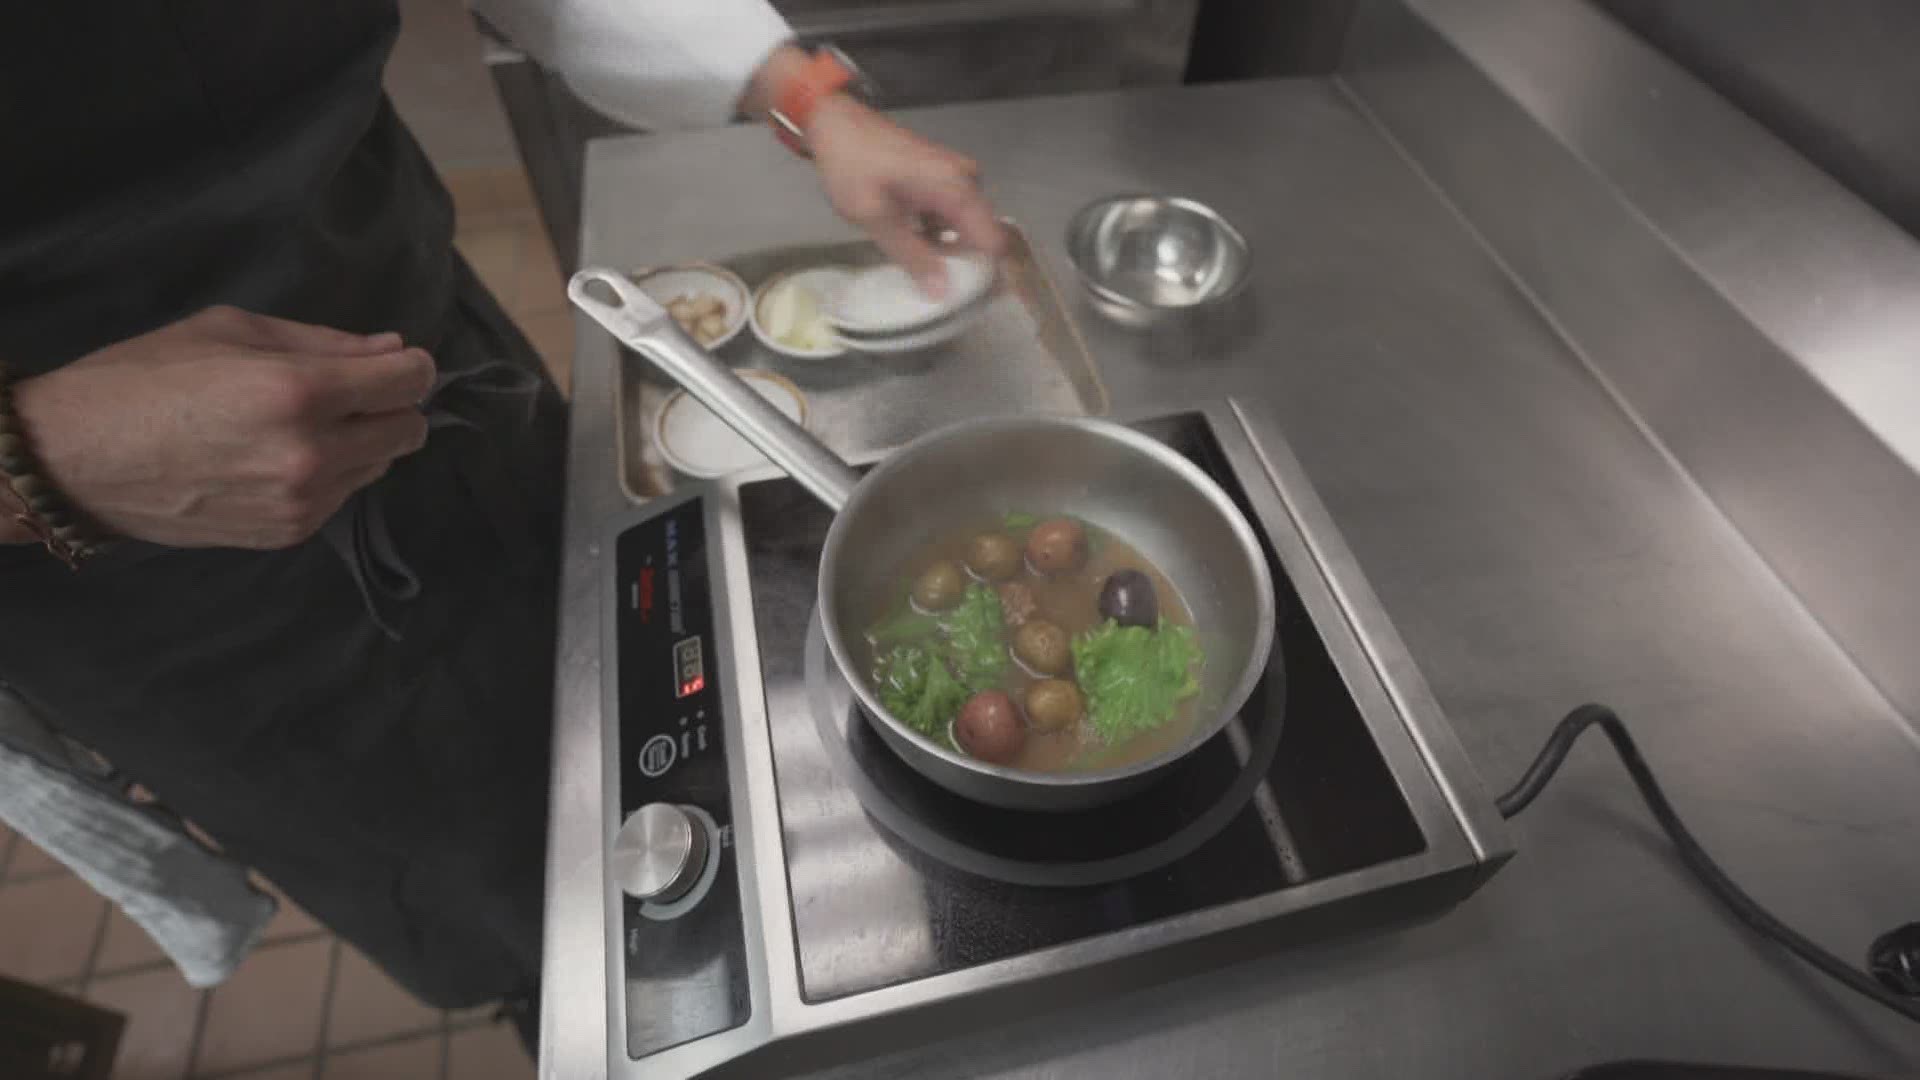 Chef Matthew Padilla shows us how from the kitchen at the Little Barn in Kennebunk.